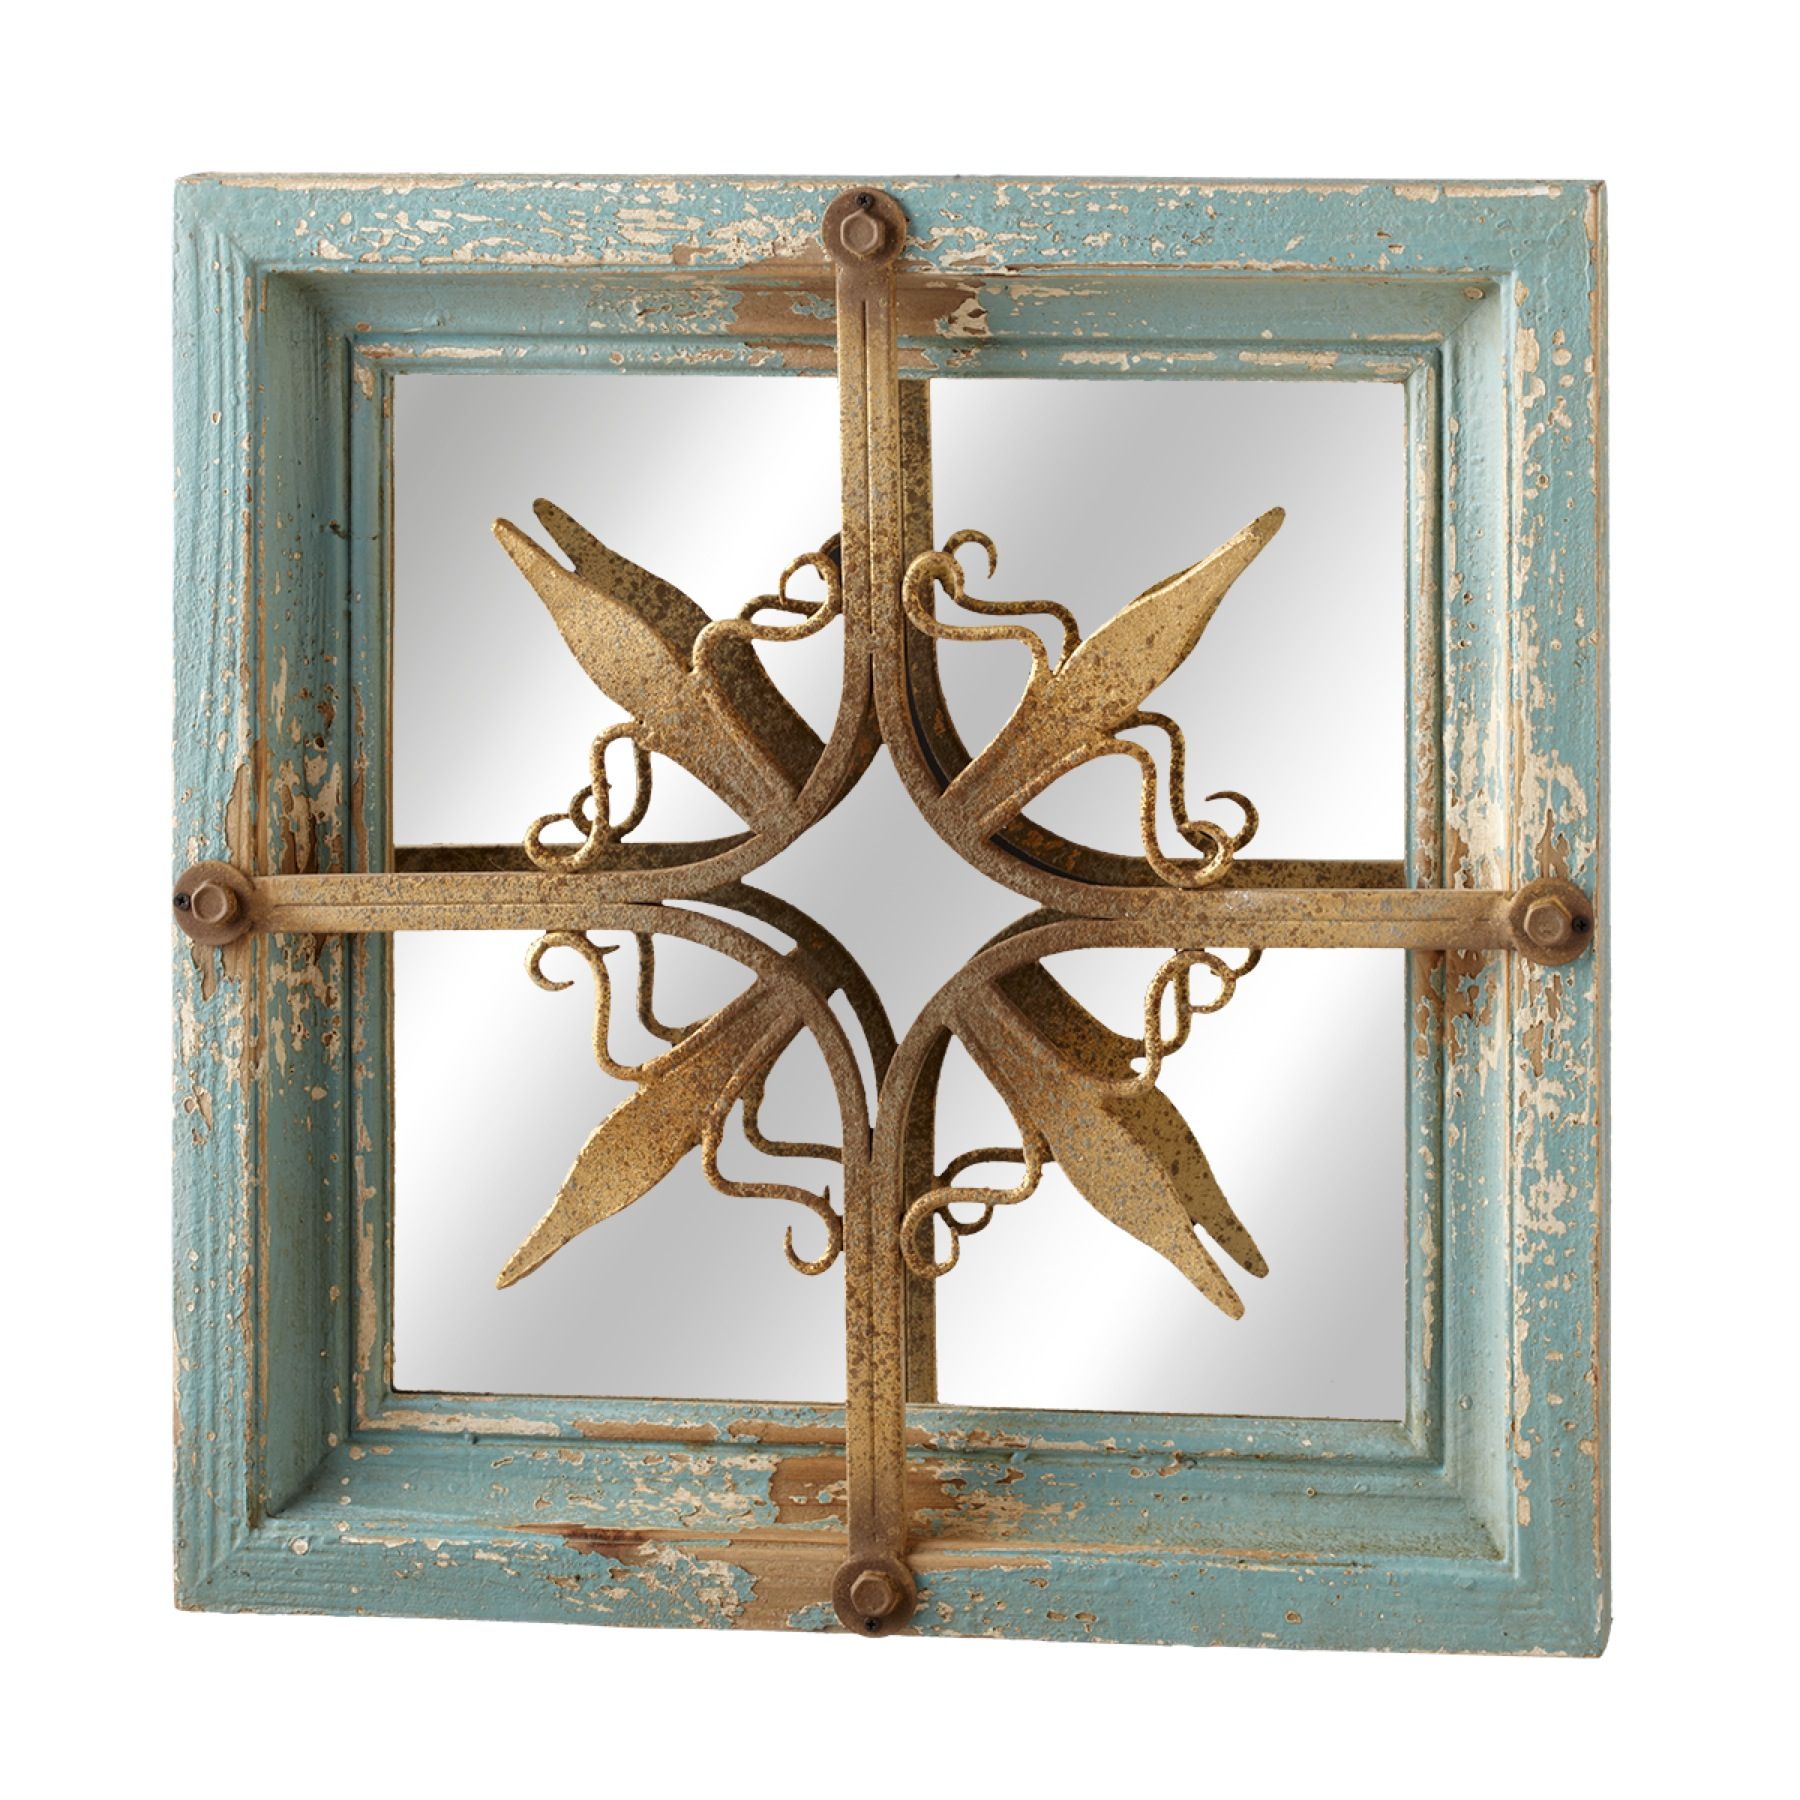 Cbk Mdf Distressed Blue And Gold Star Square Wall Mirror 126613 Inside Glossy Blue Wall Mirrors (View 3 of 15)